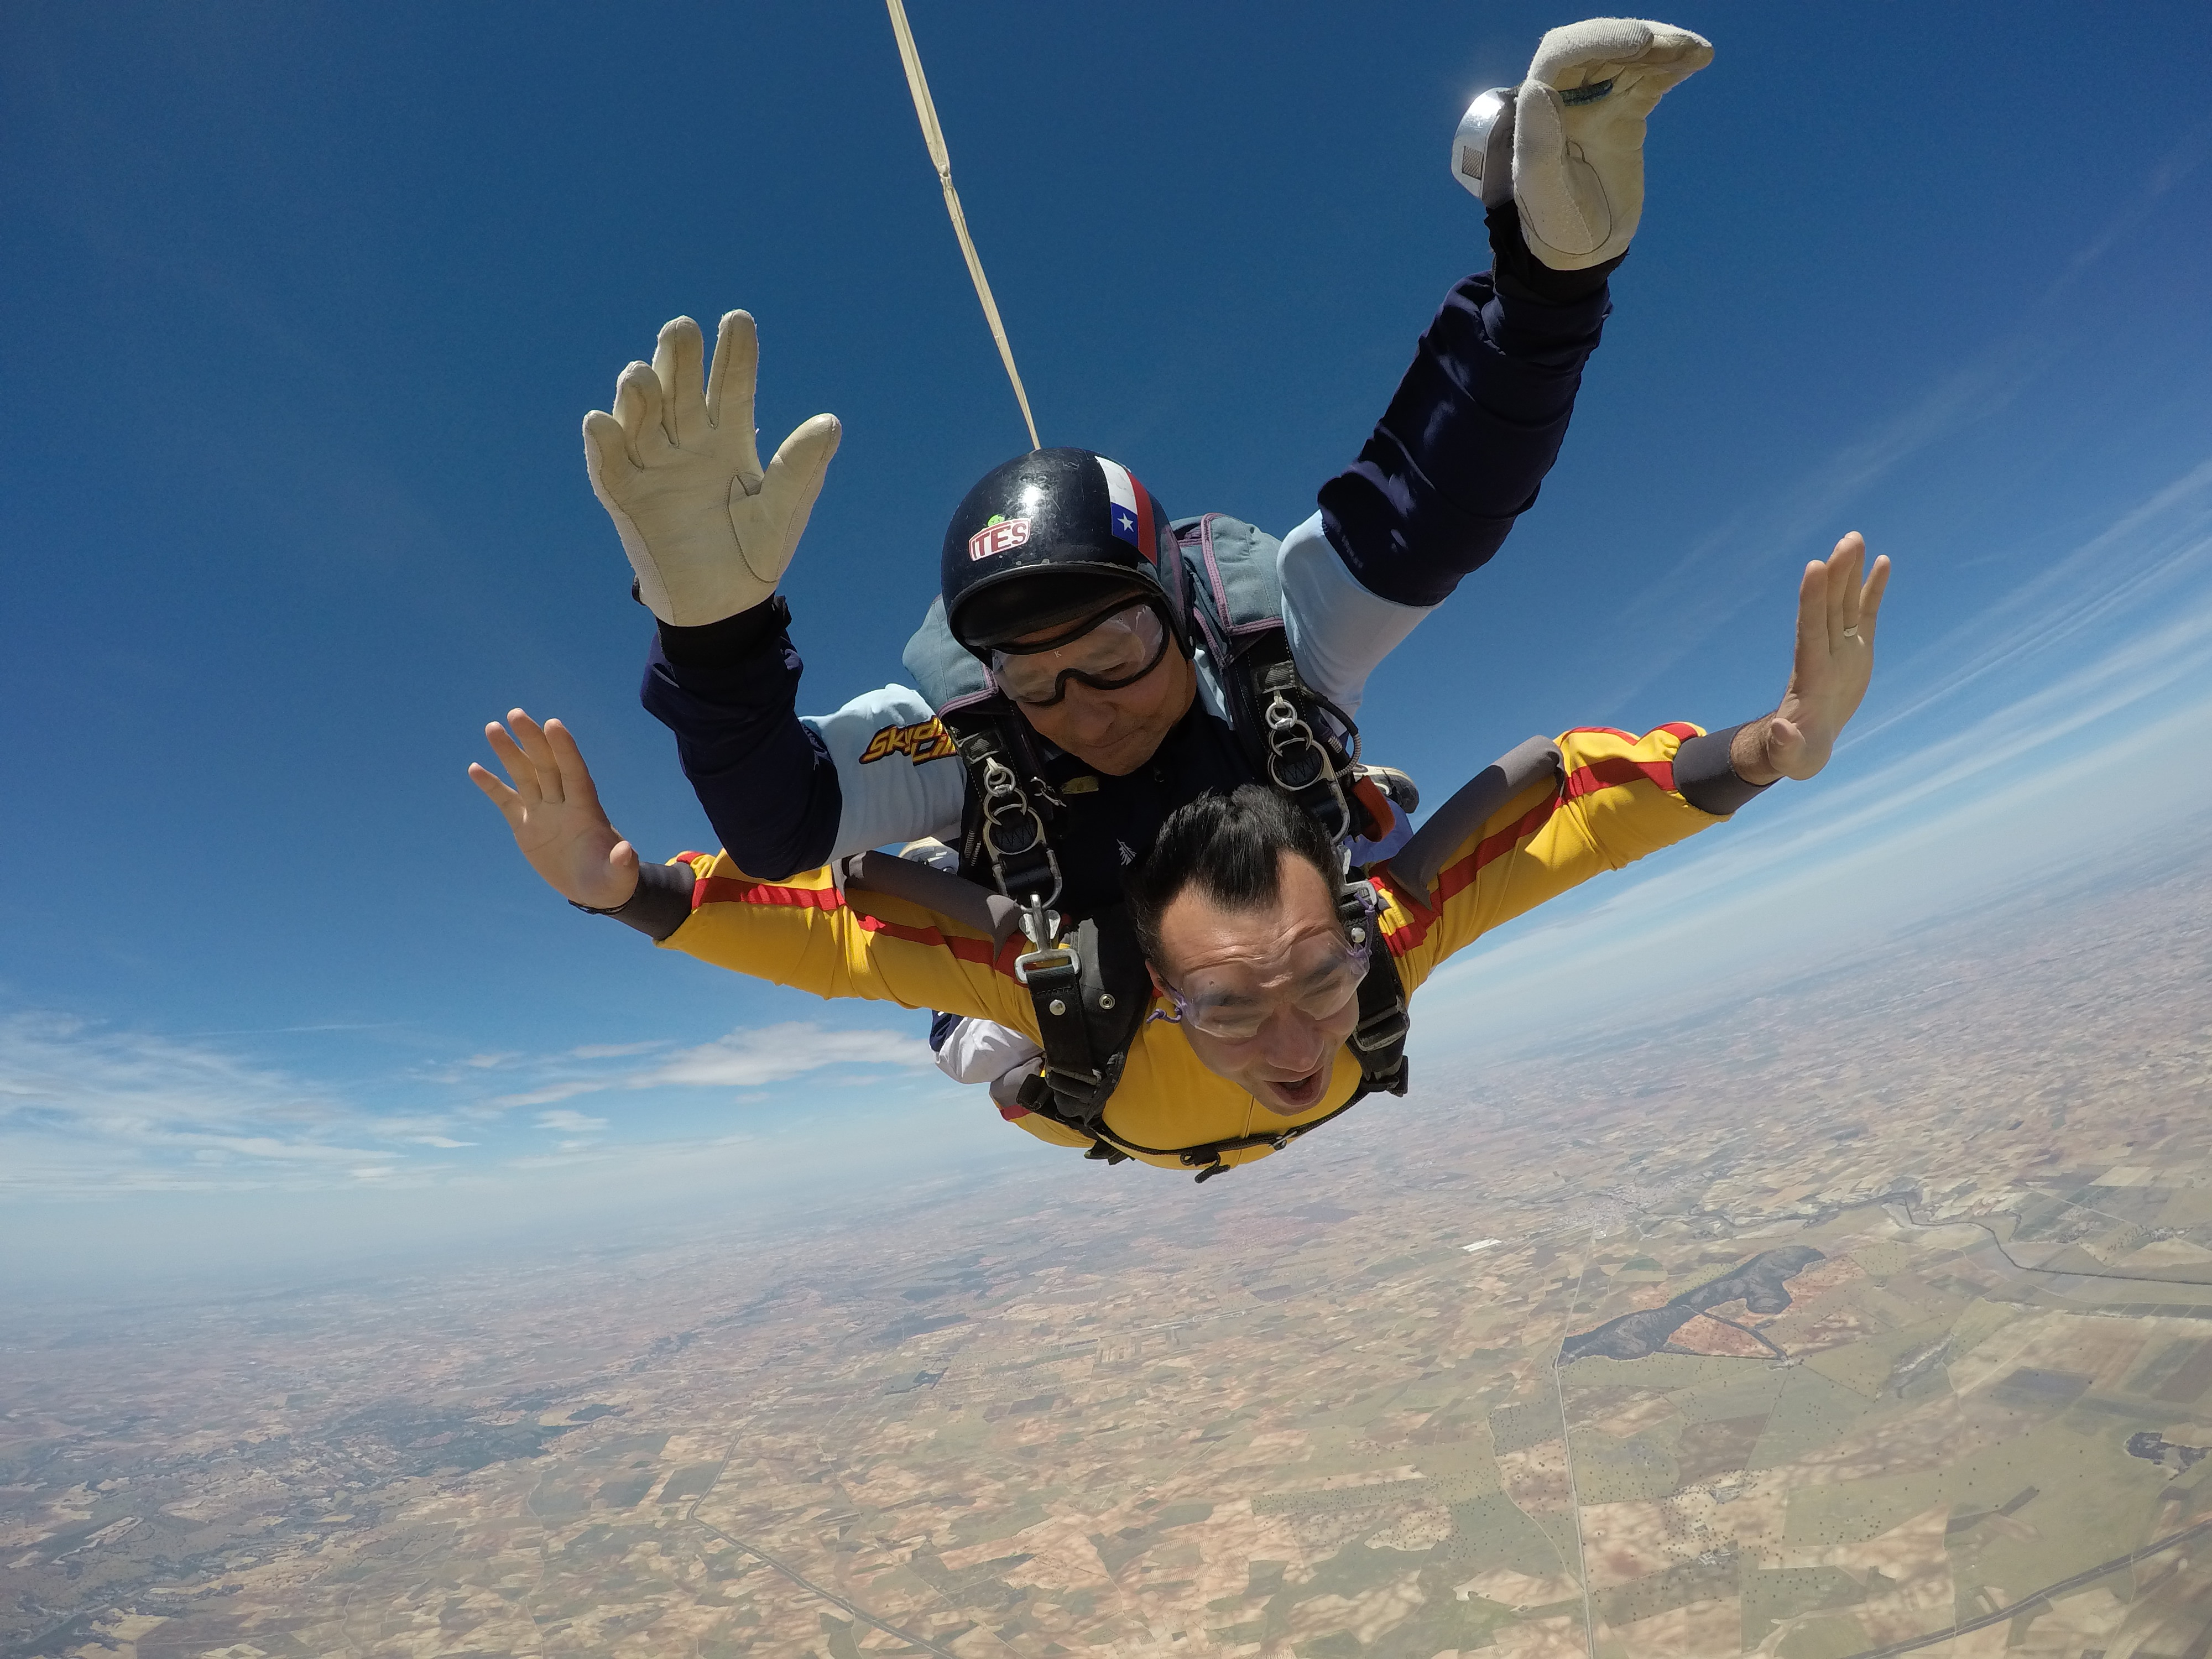 Skydiving Madrid. Tandem jump, your first time skydiving.